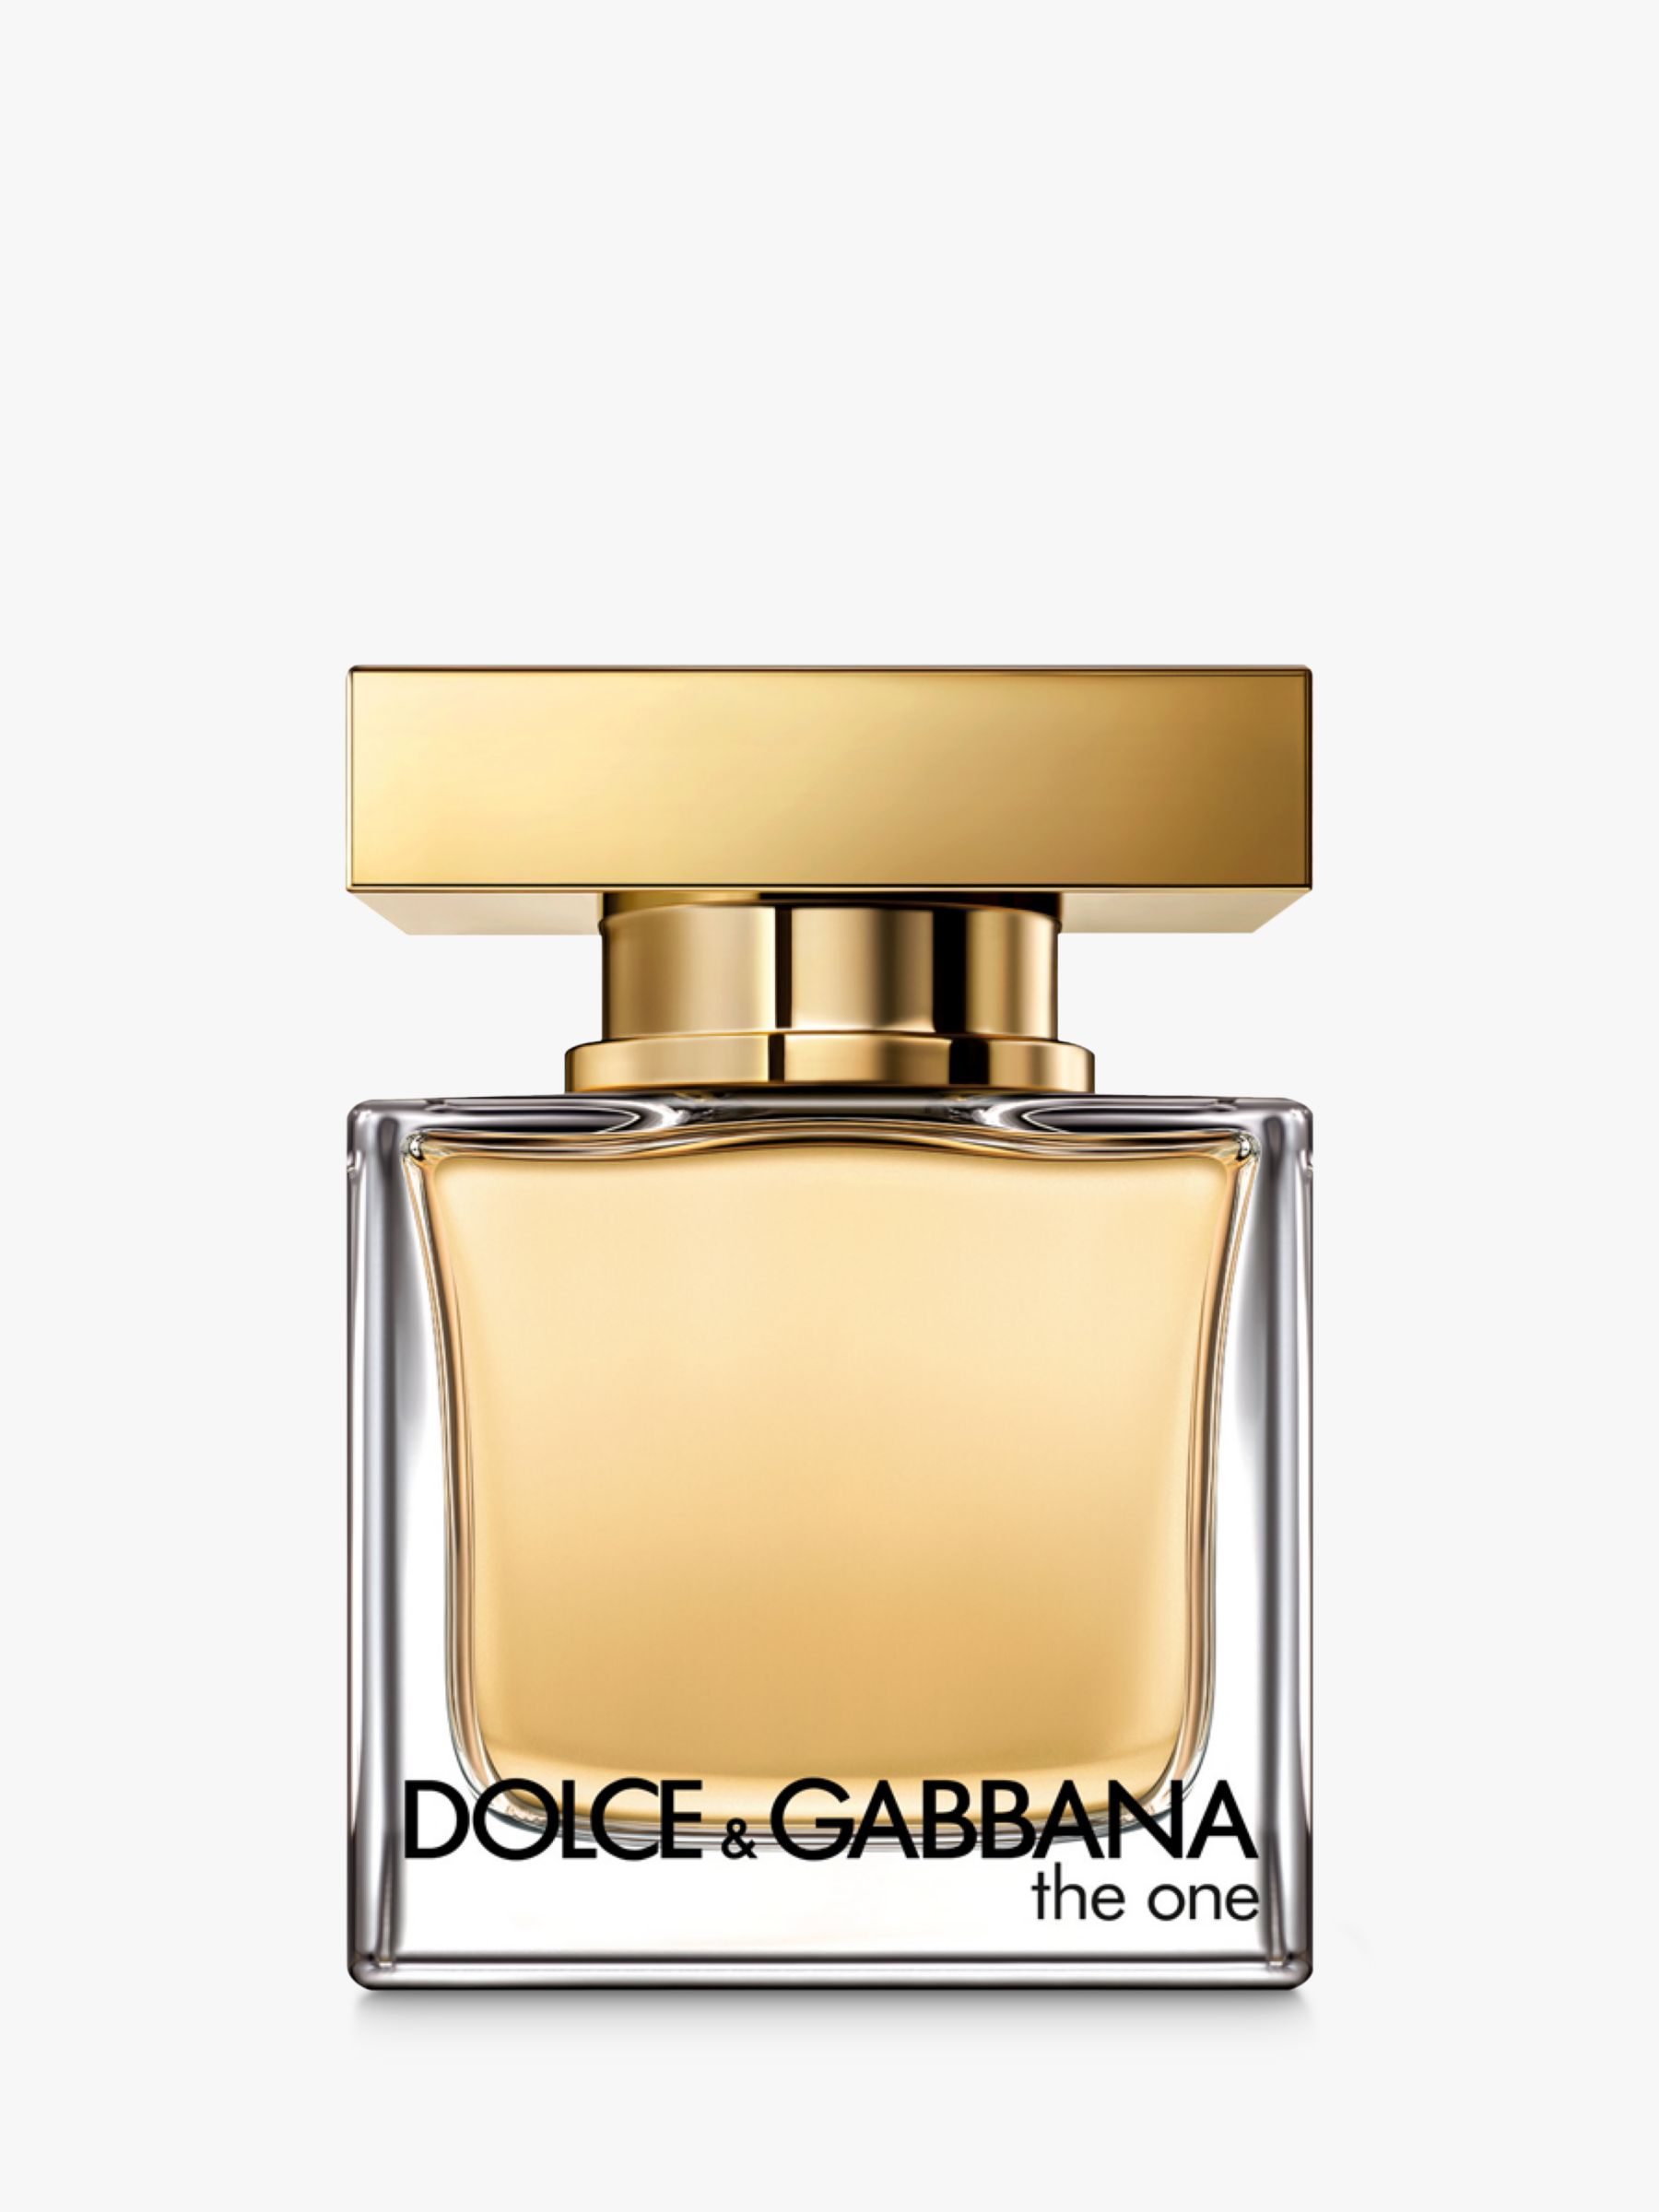 Dolce And Gabbana The One Eau De Toilette At John Lewis And Partners